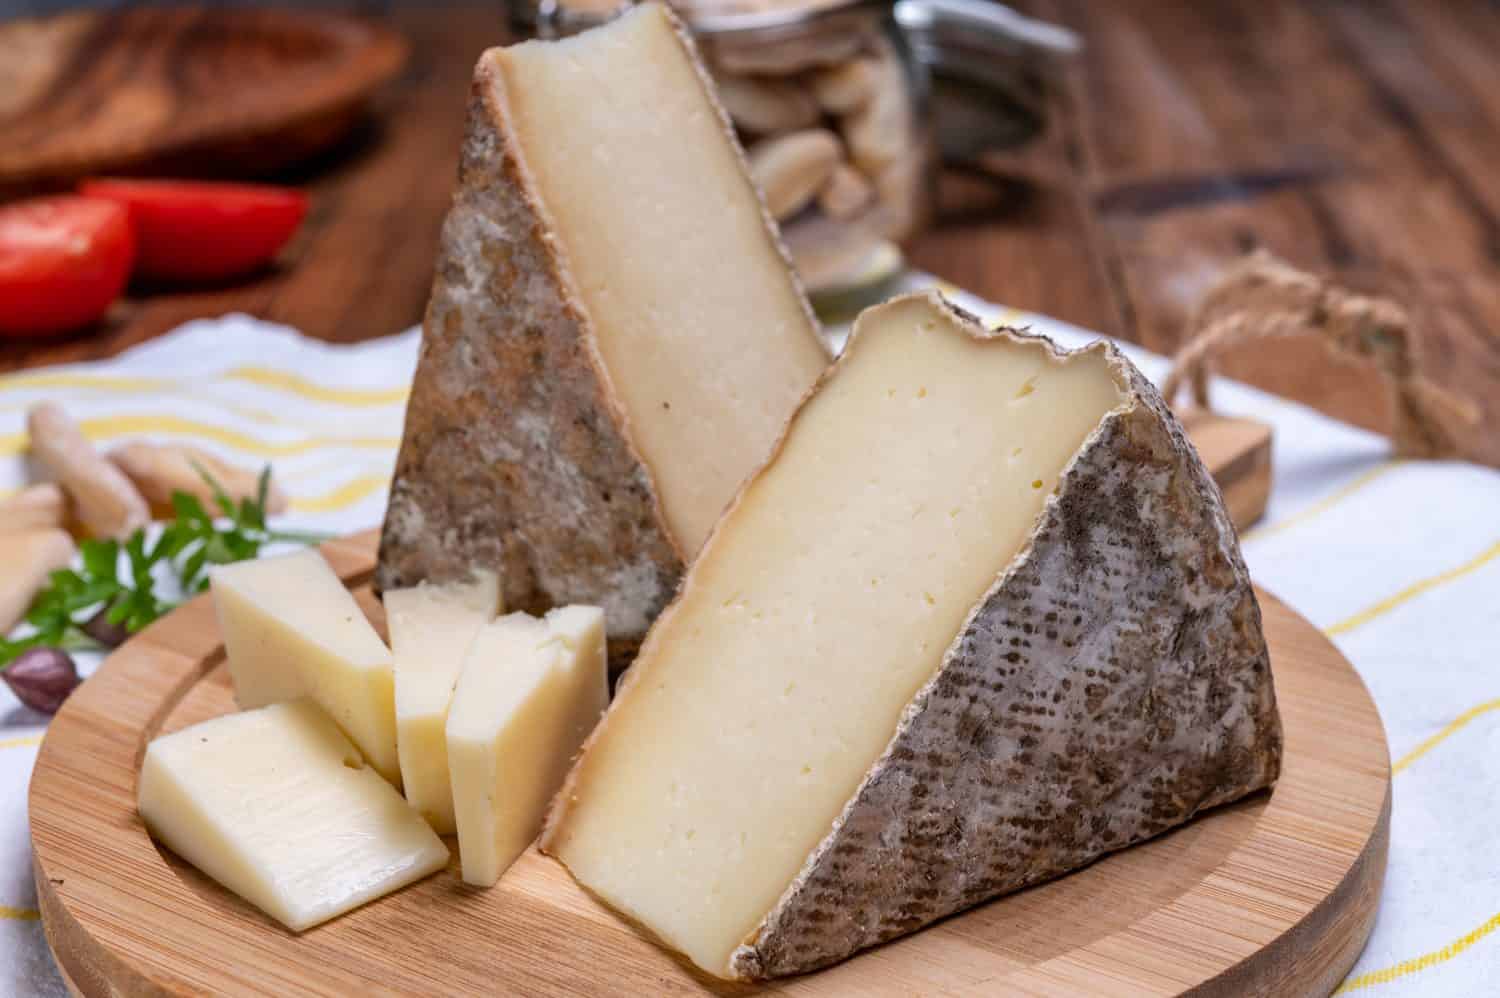 Pieces of cheese tomme de montagne or tomme de savoie made from cow milk in French Alps.